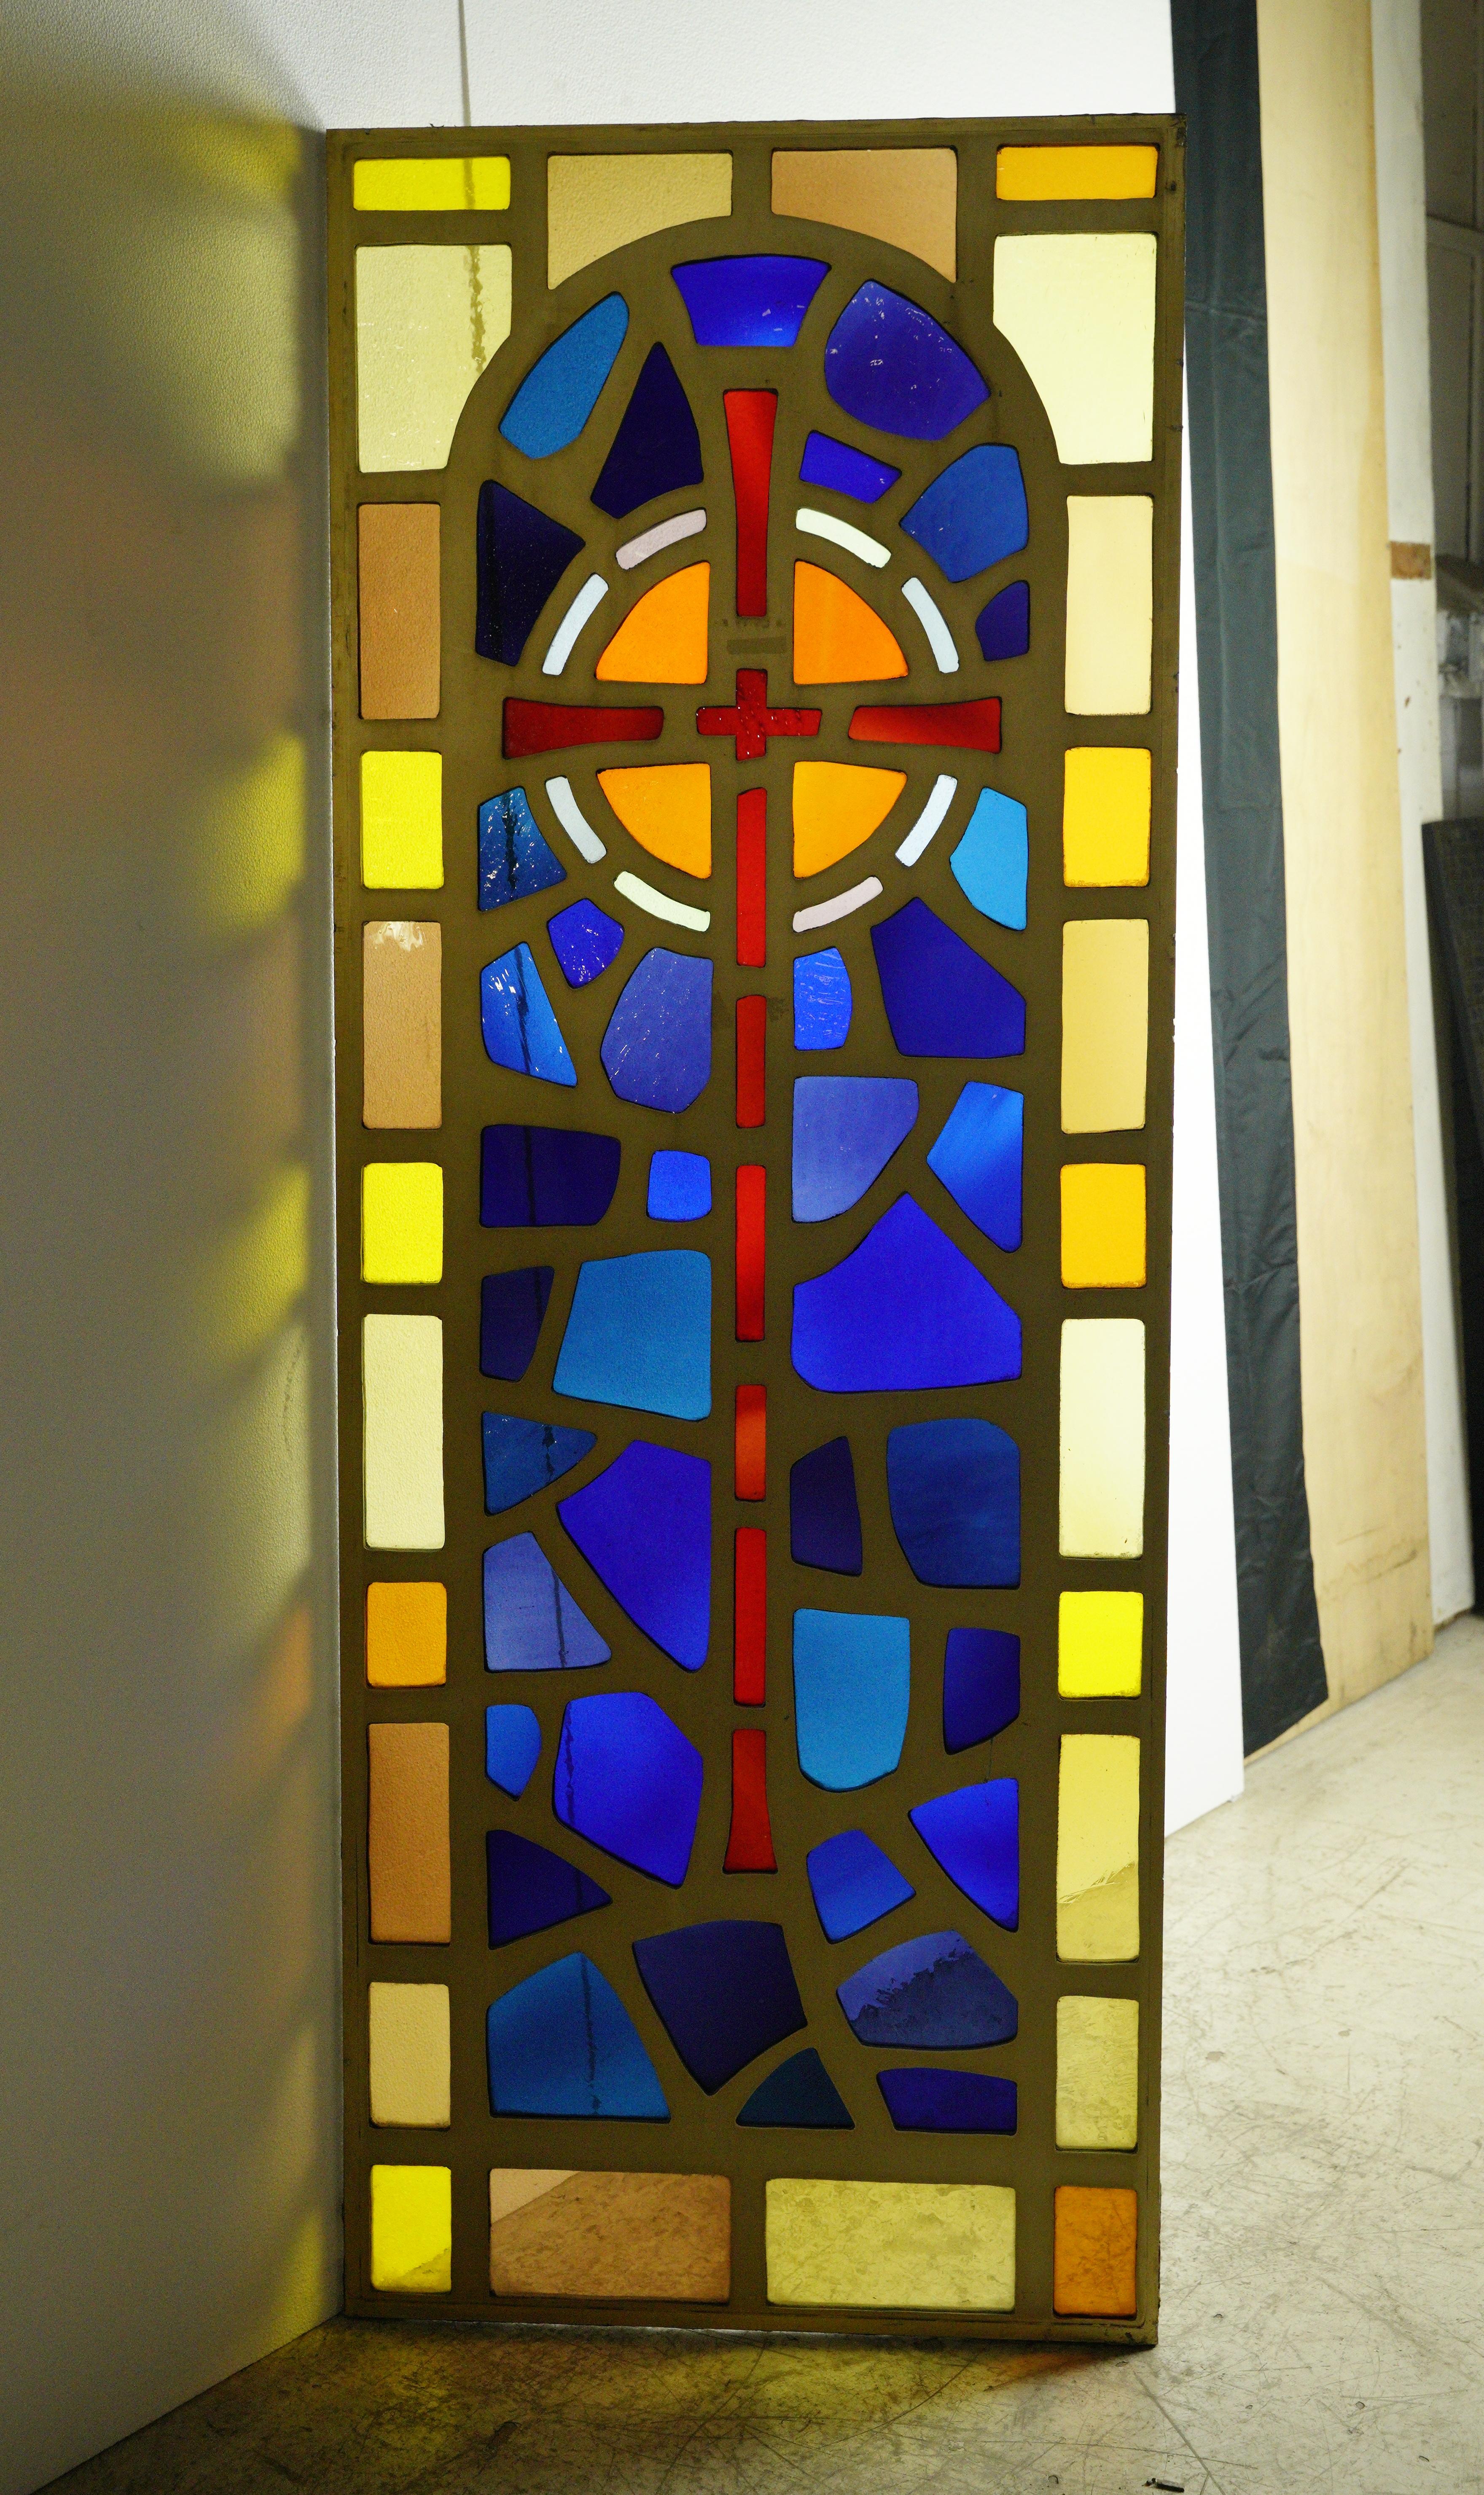 Brass coated aluminum church window with vibrant hues of blue, orange, and yellow stained glass with a centered red cross. Good condition with appropriate wear from age, with slight damage around the edges from its removal. One available. Please